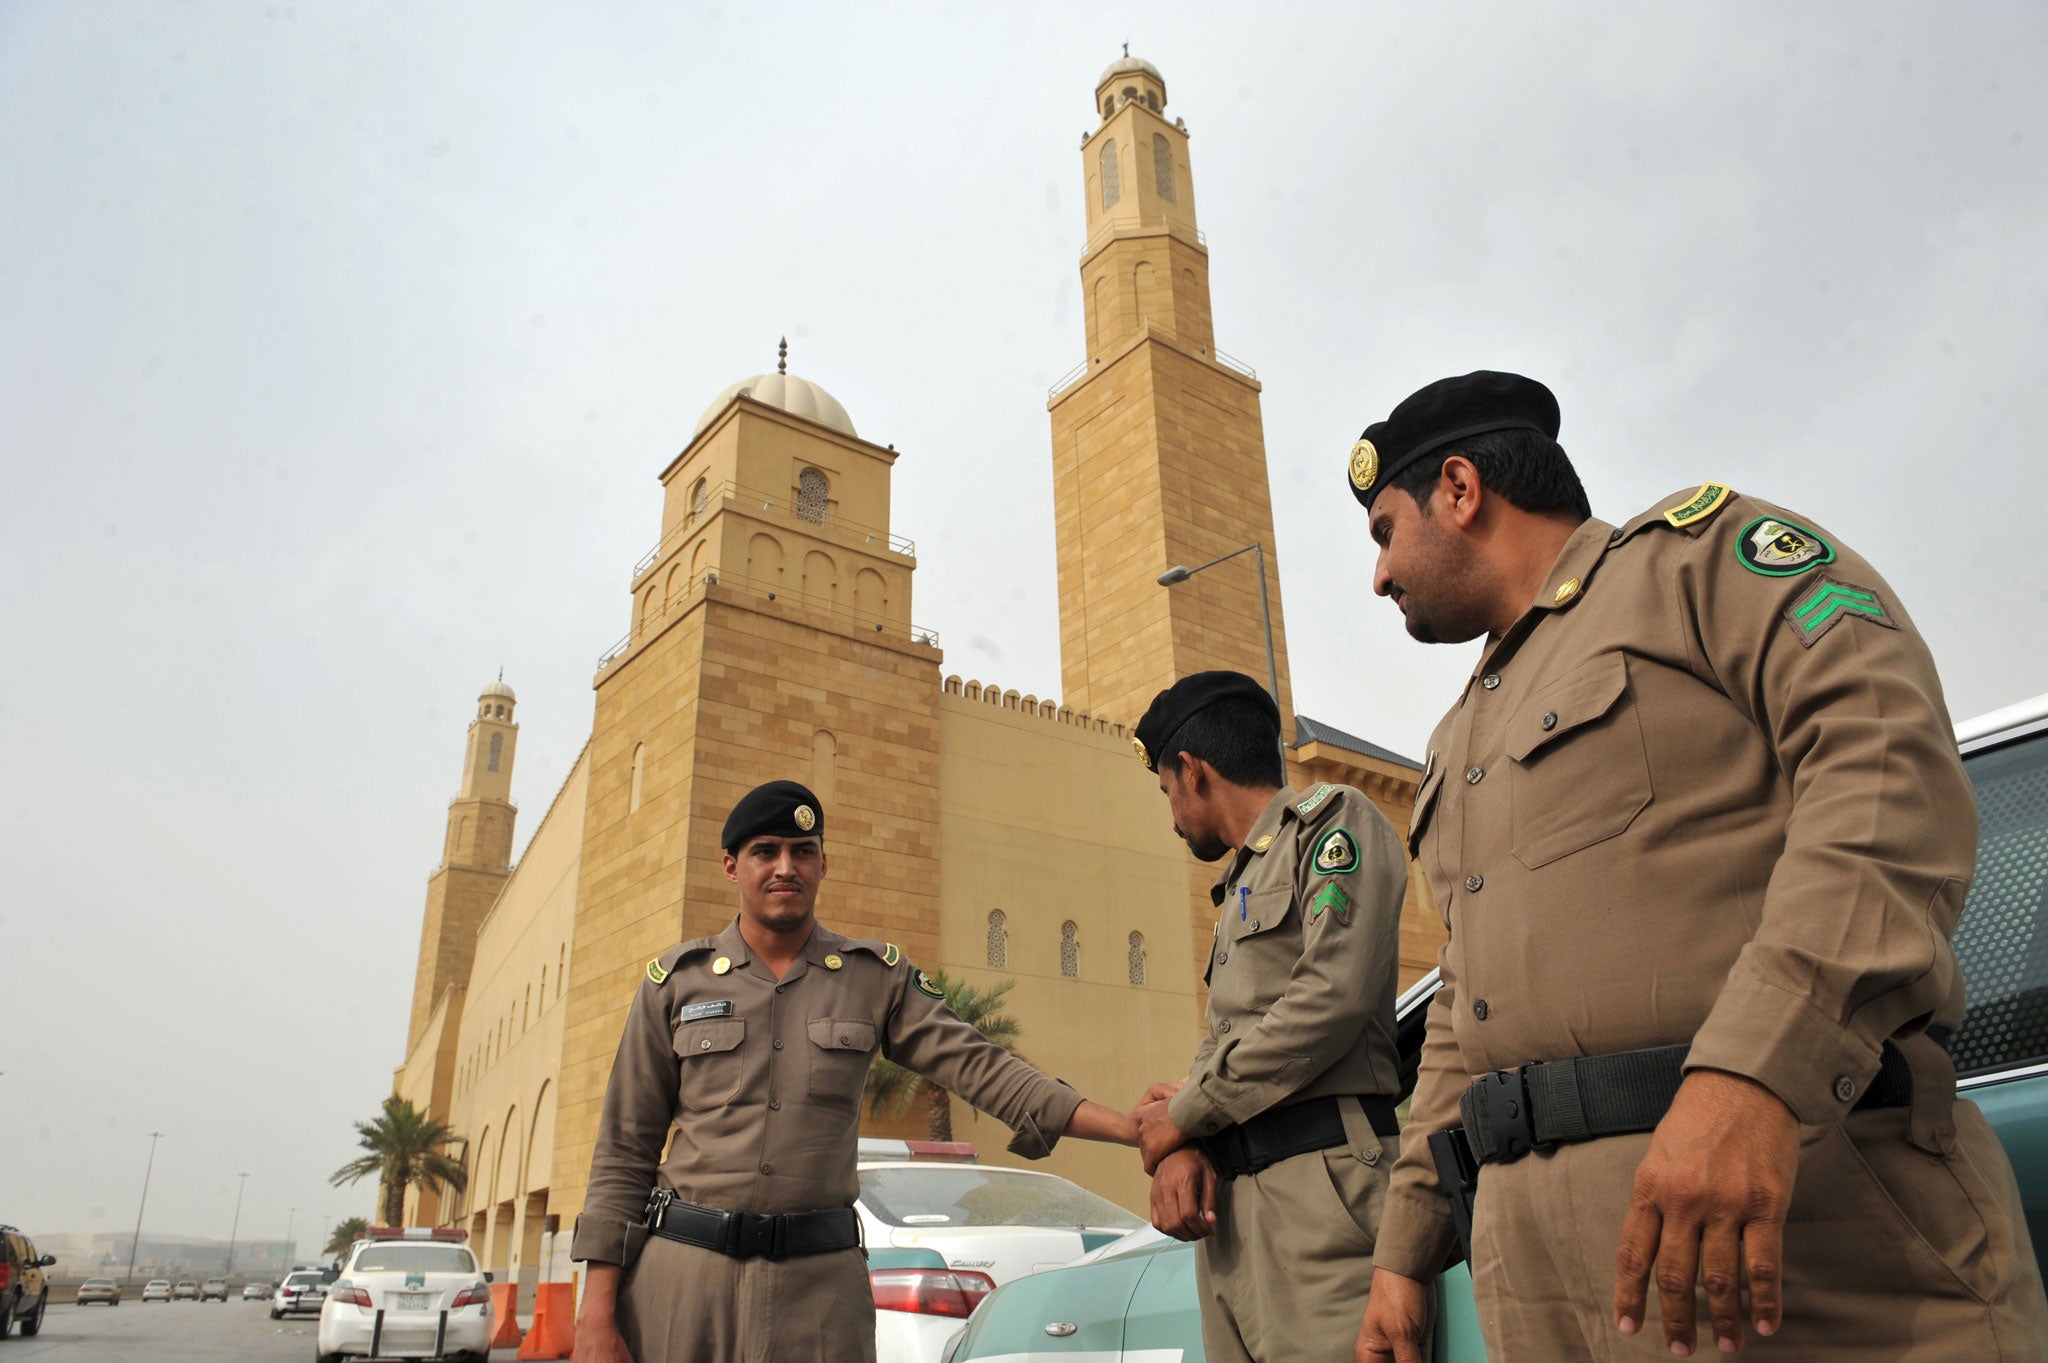 Saudi policemen stand guard in front of 'Al-rajhi mosque' in central Riyadh